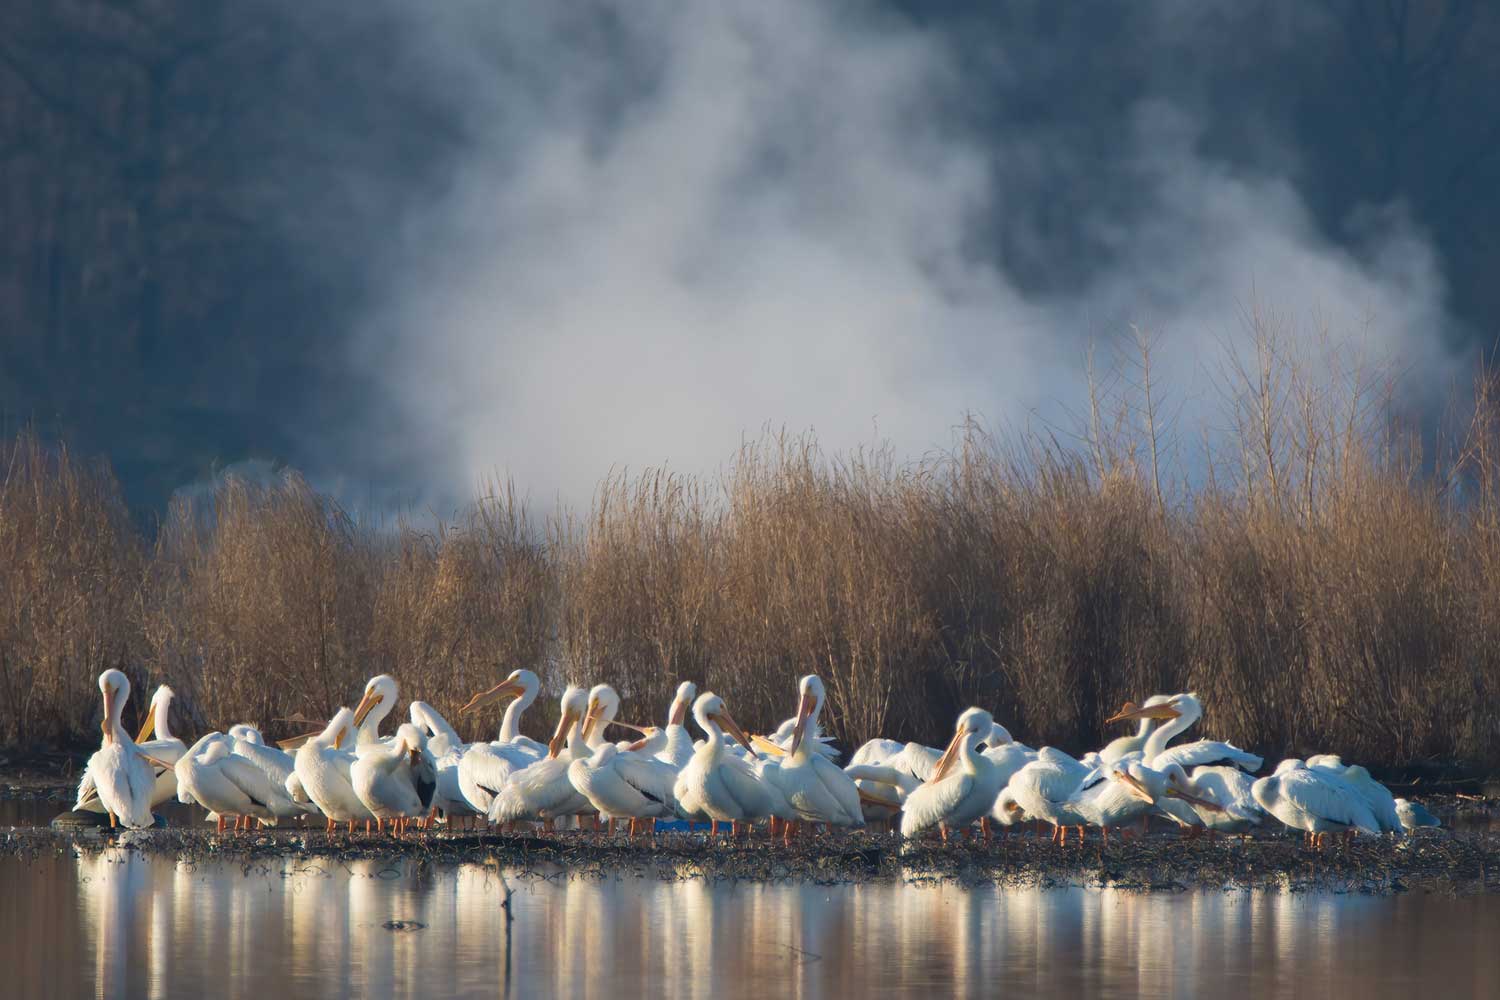 A group of American white pelicans standing near the water.